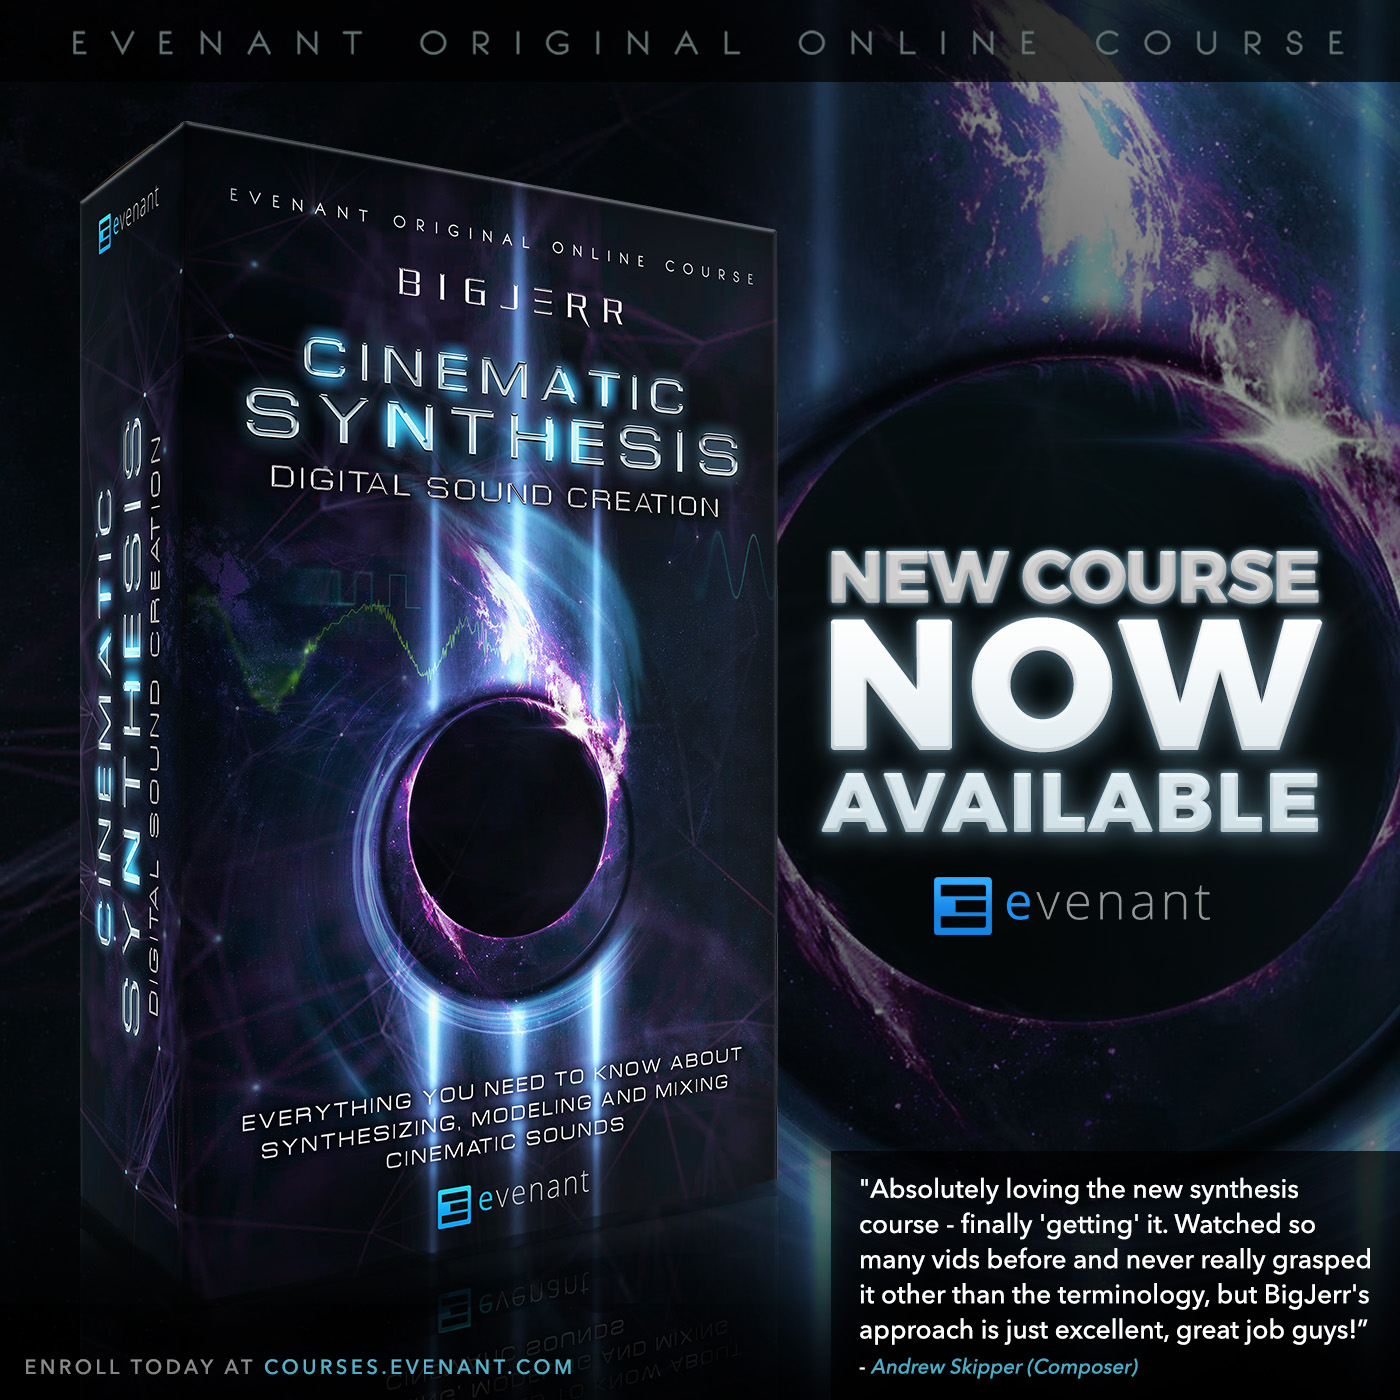 Cinematic Synthesis: Digital Sound Creation – New Evenant Course